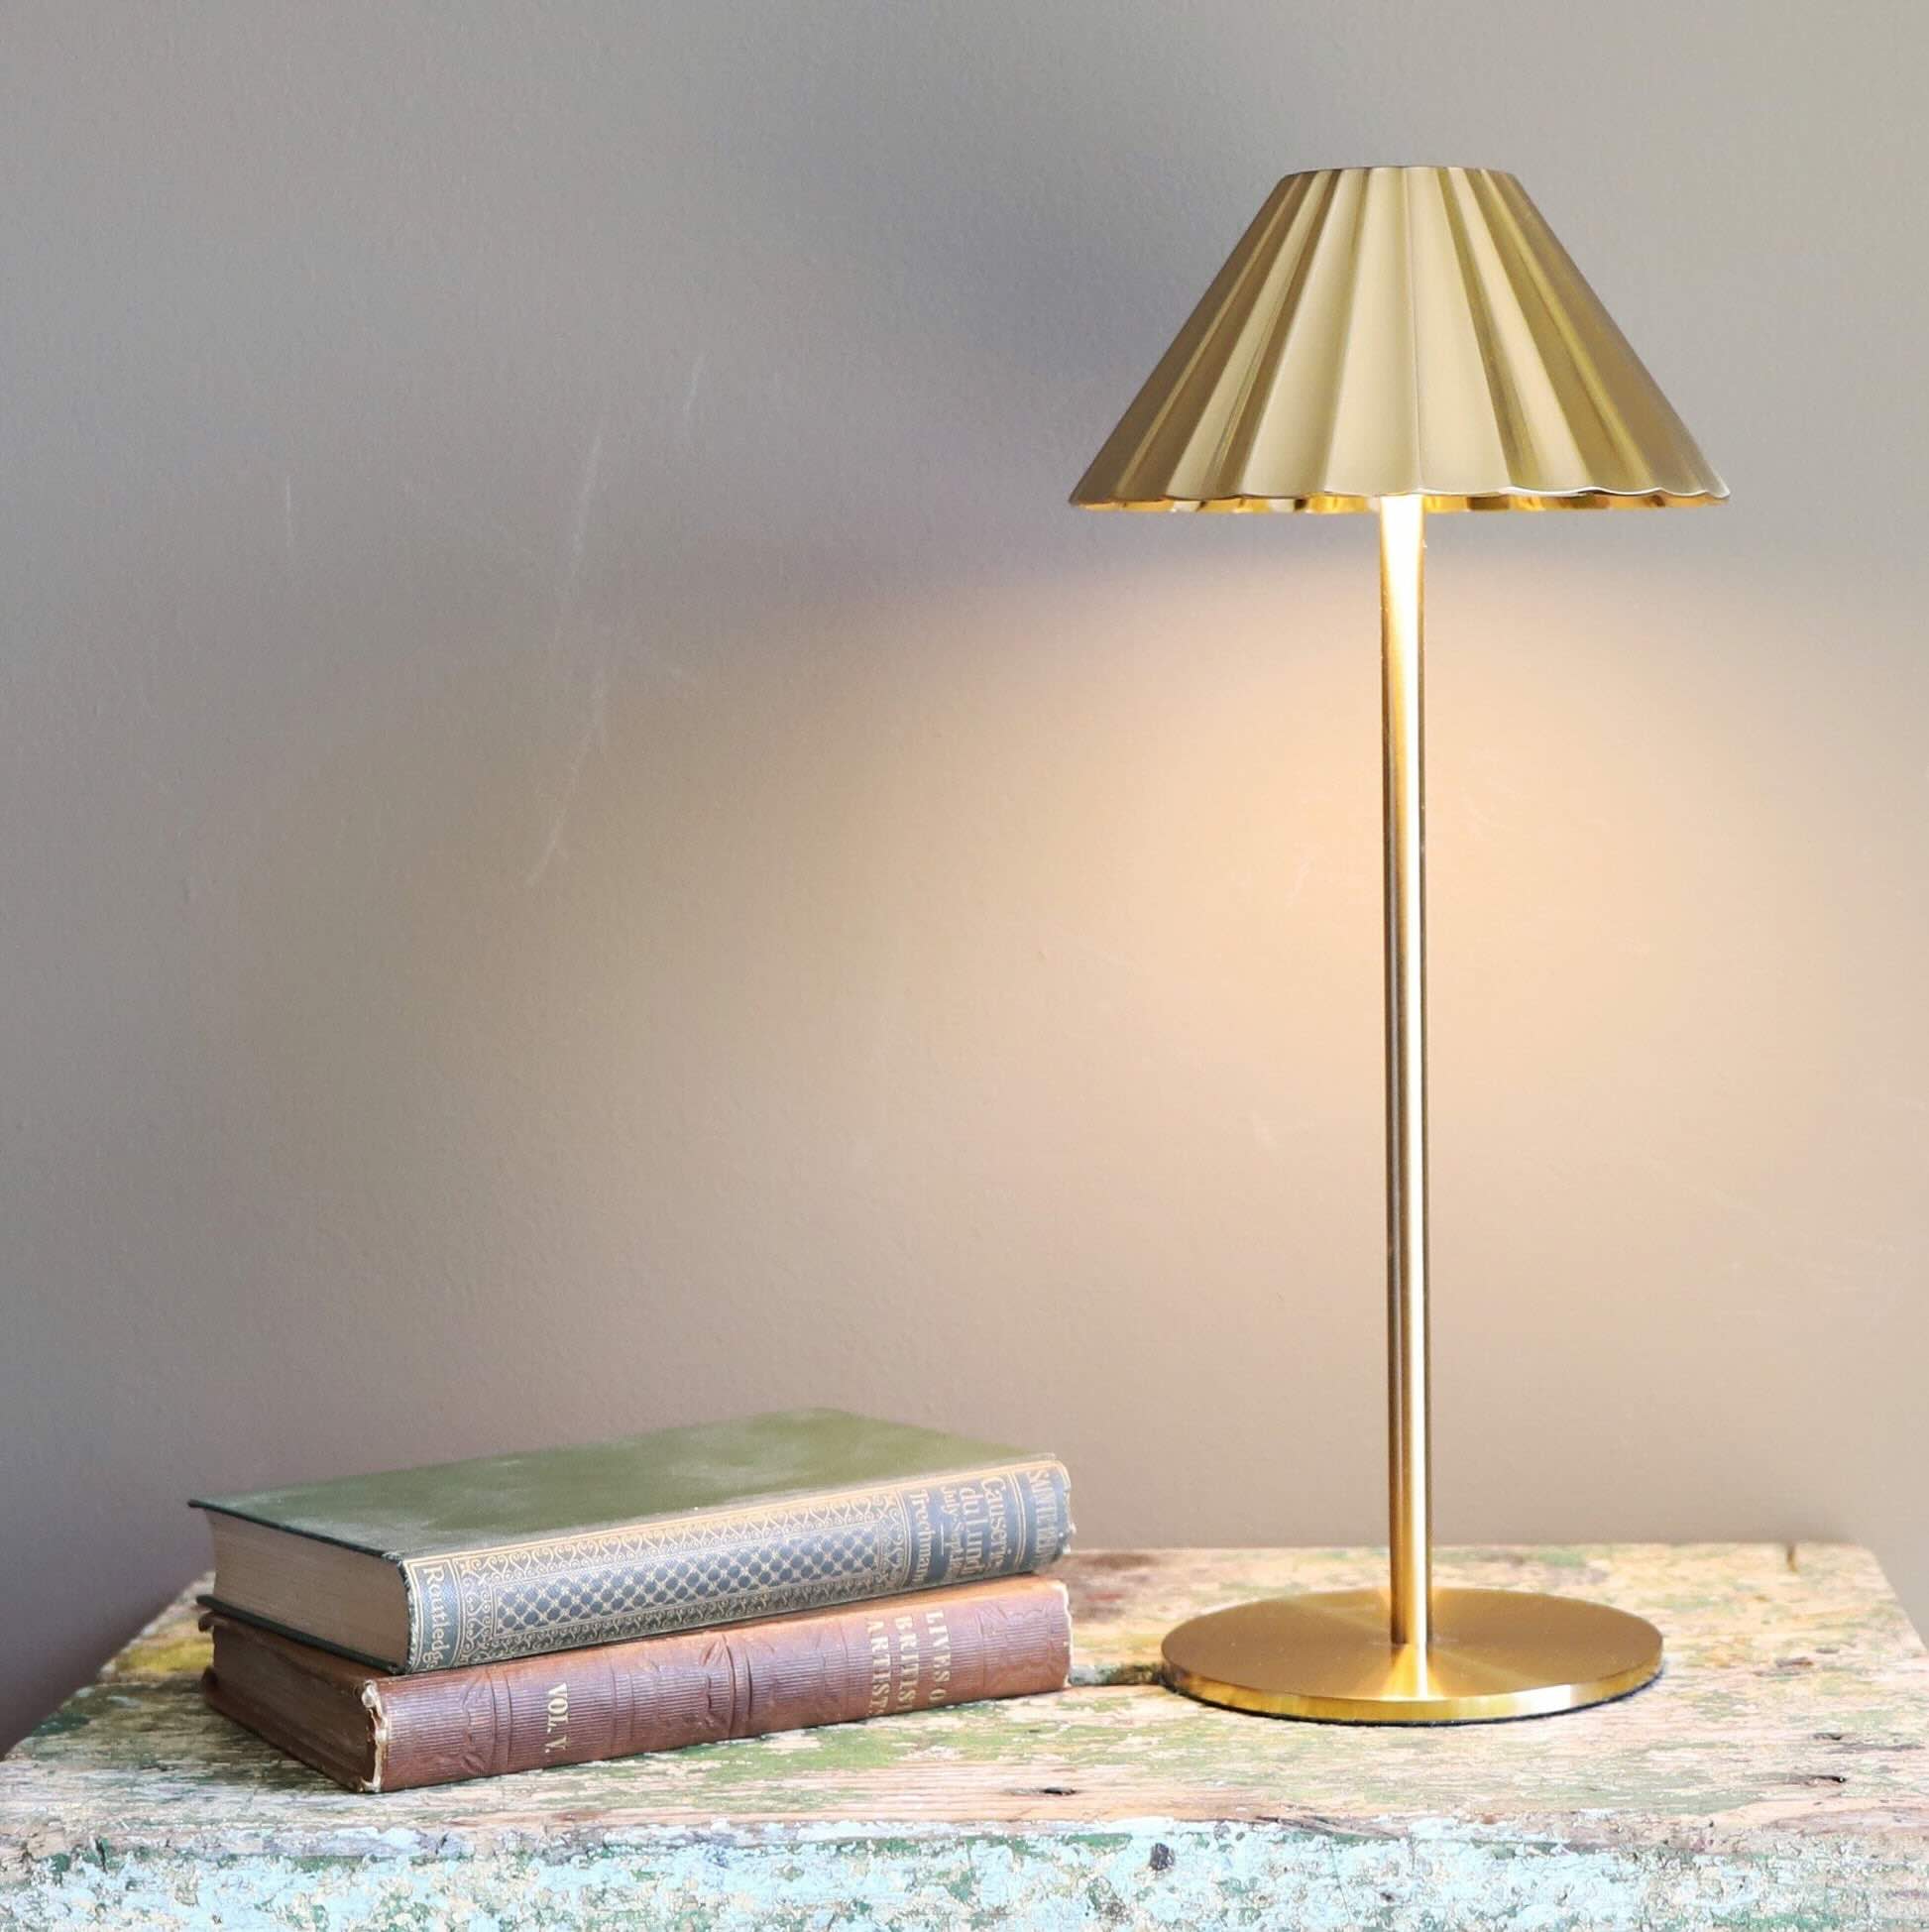 How To Make A Cordless Lamp